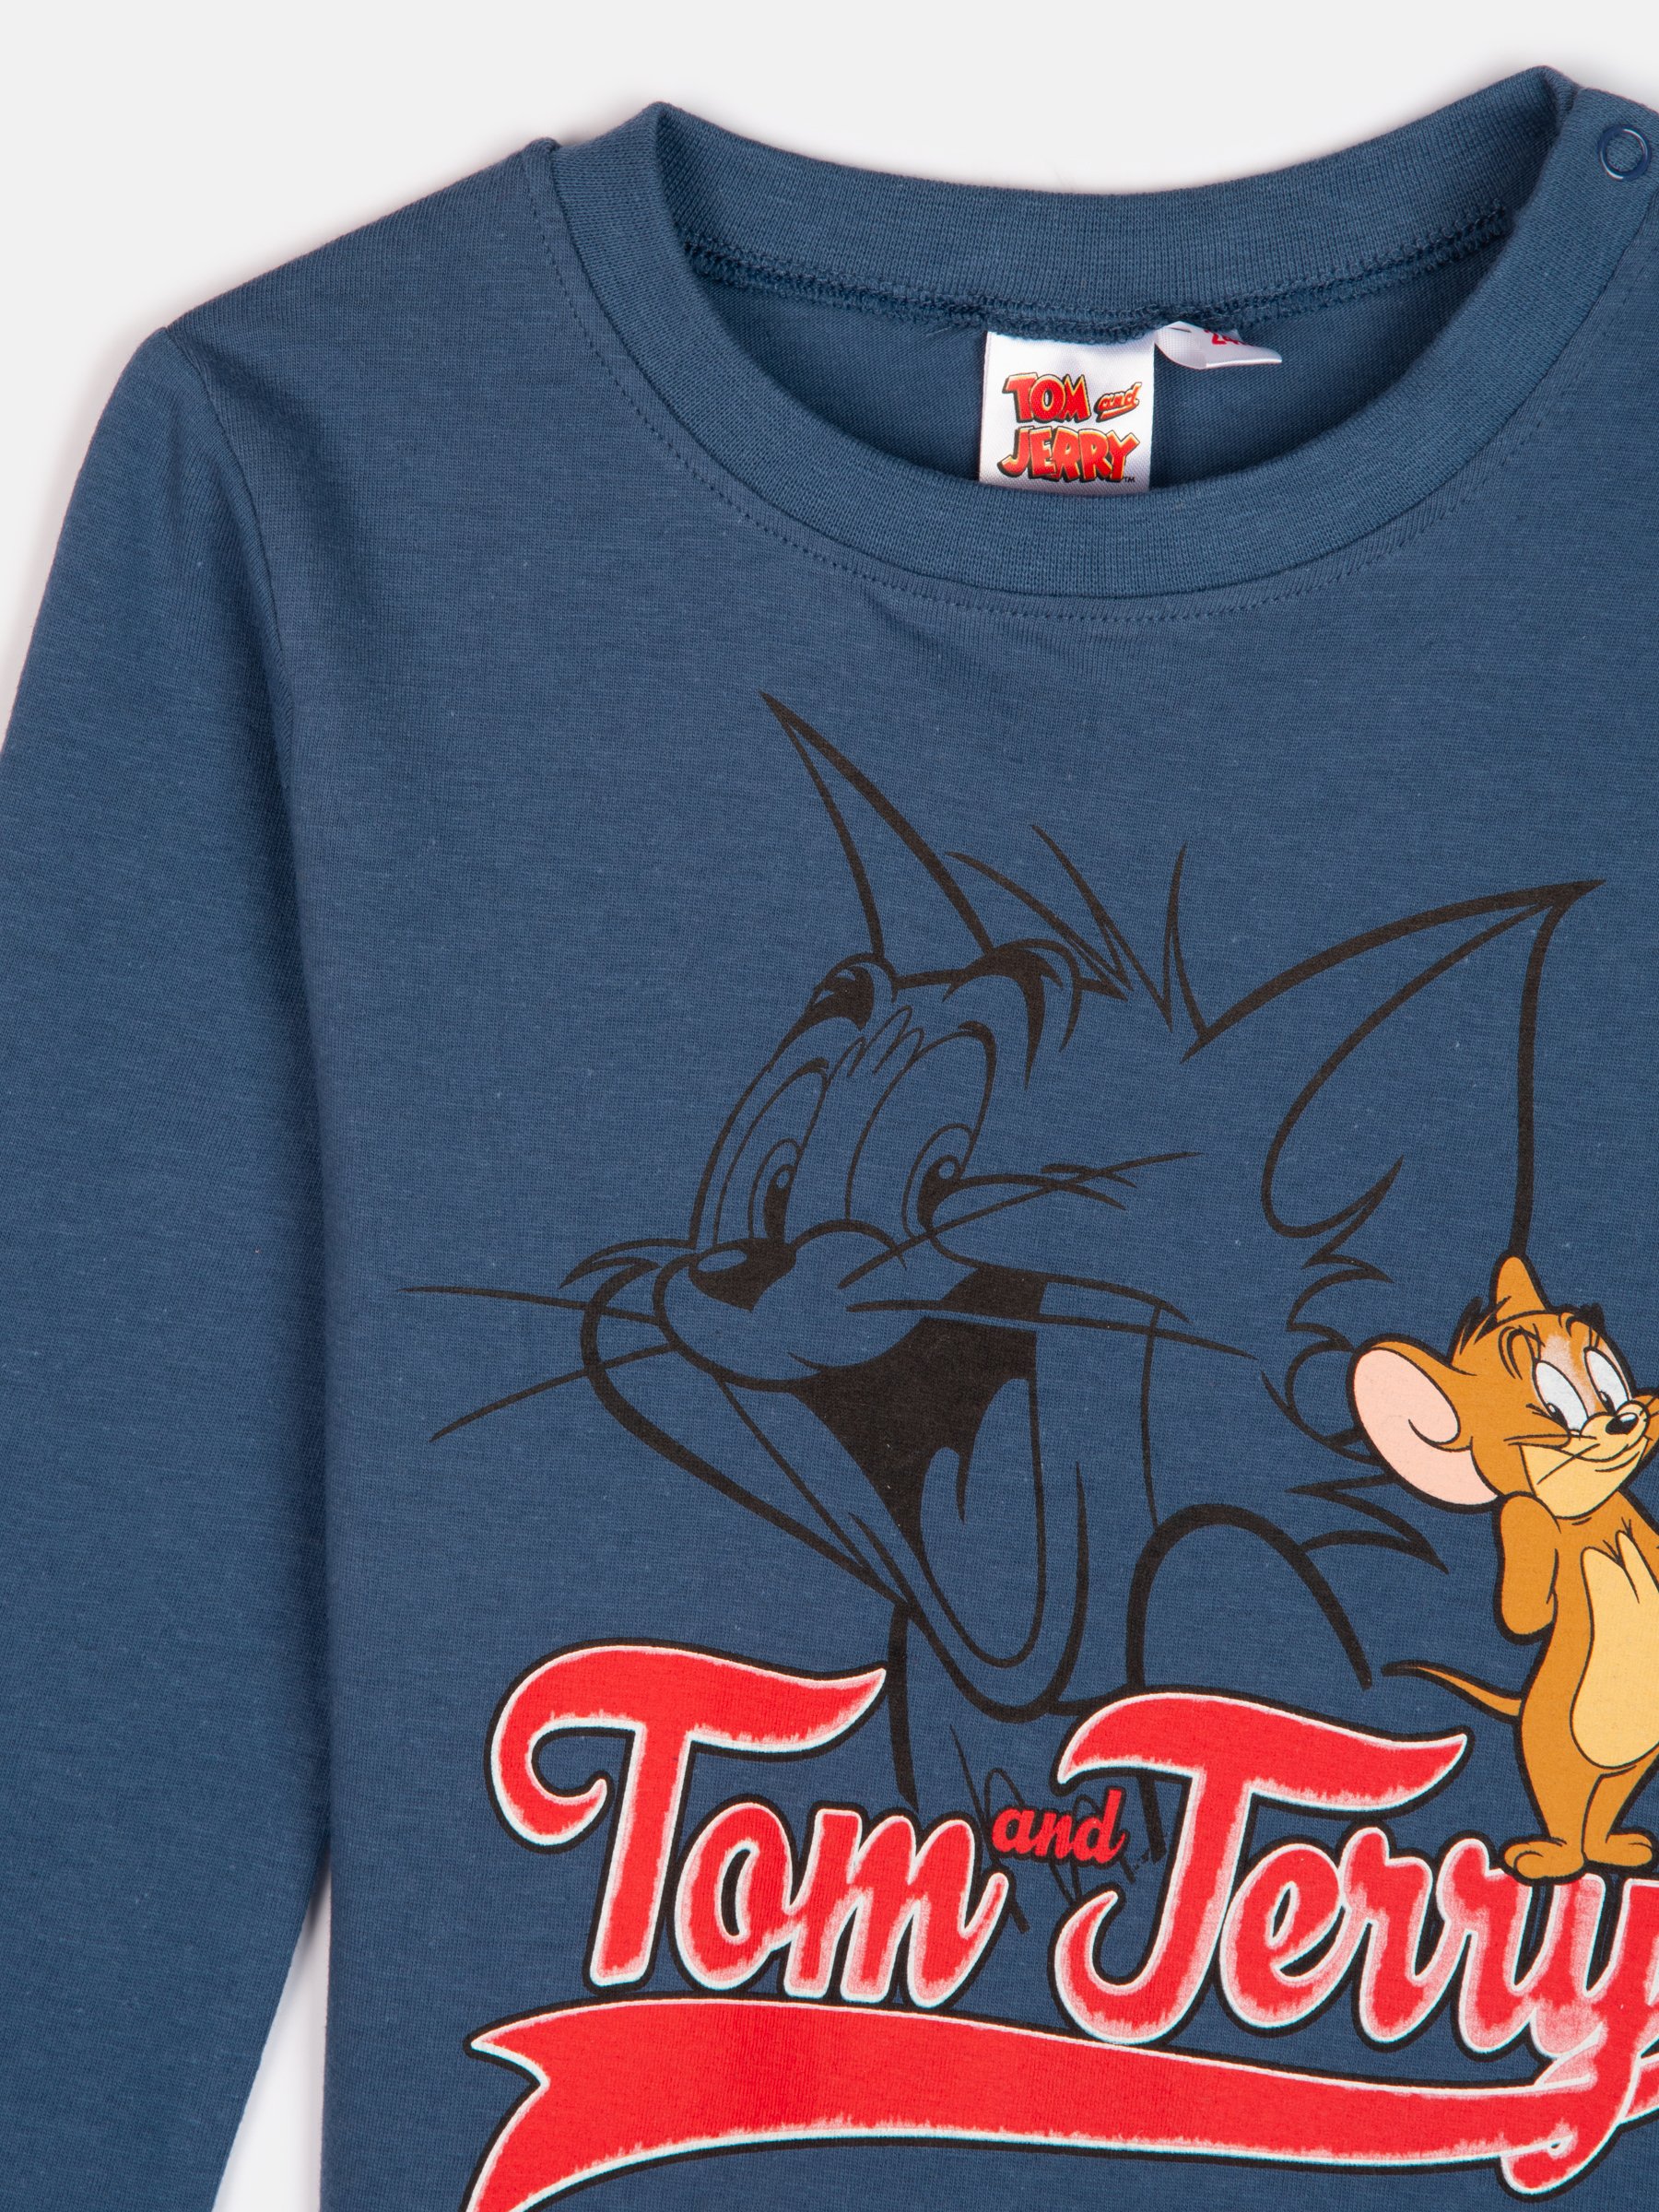 Tom Cat Nike Just Do It Louis Vuitton Tom and Jerry Shirt – Full